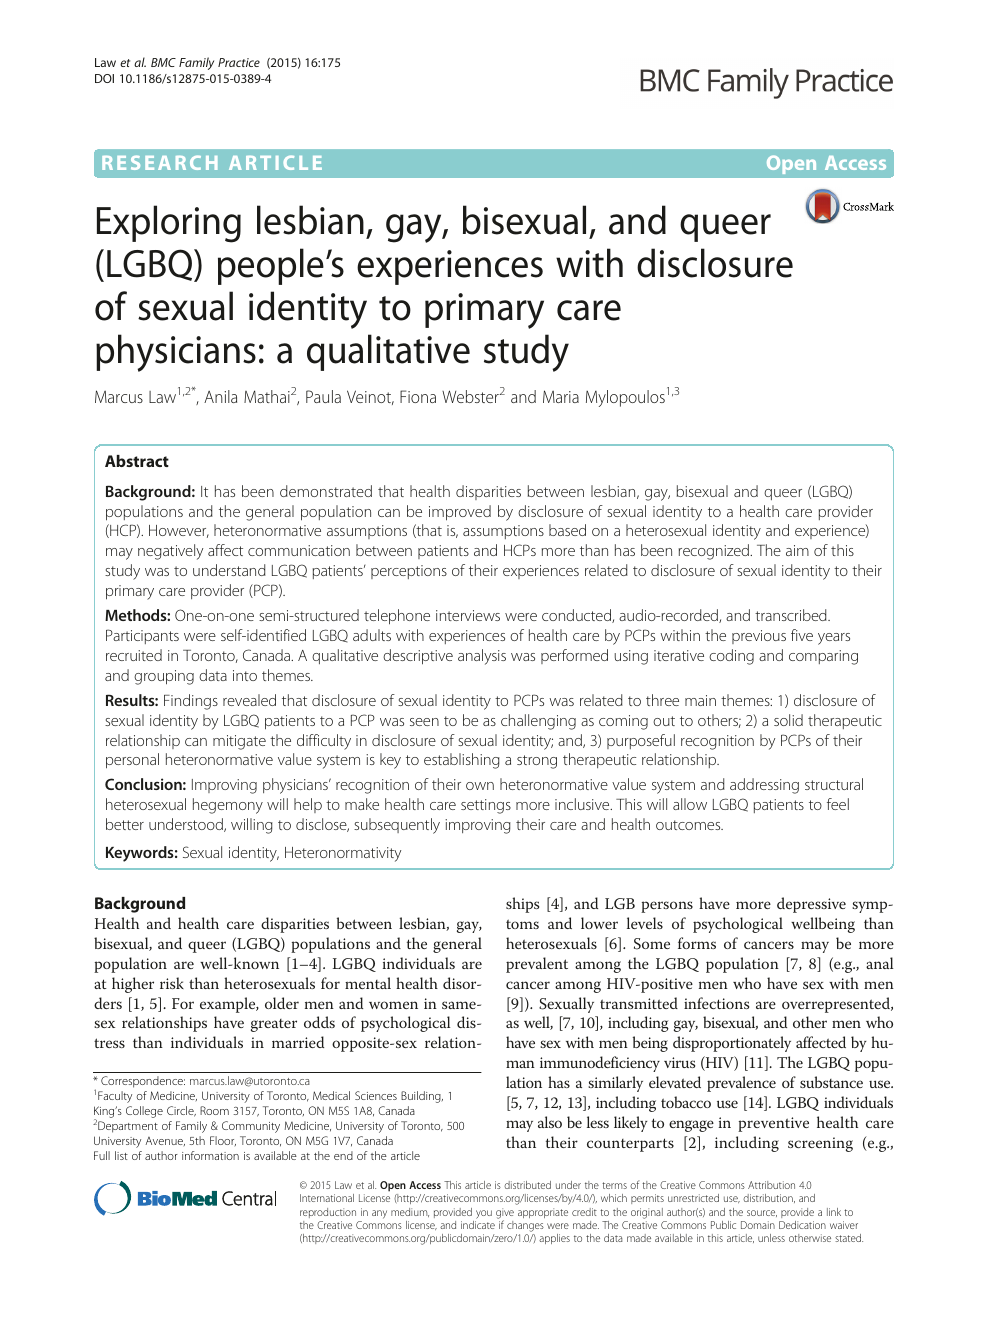 Exploring lesbian, gay, bisexual, and queer (LGBQ) peoples experiences with disclosure of sexual identity to primary care physicians a qualitative study